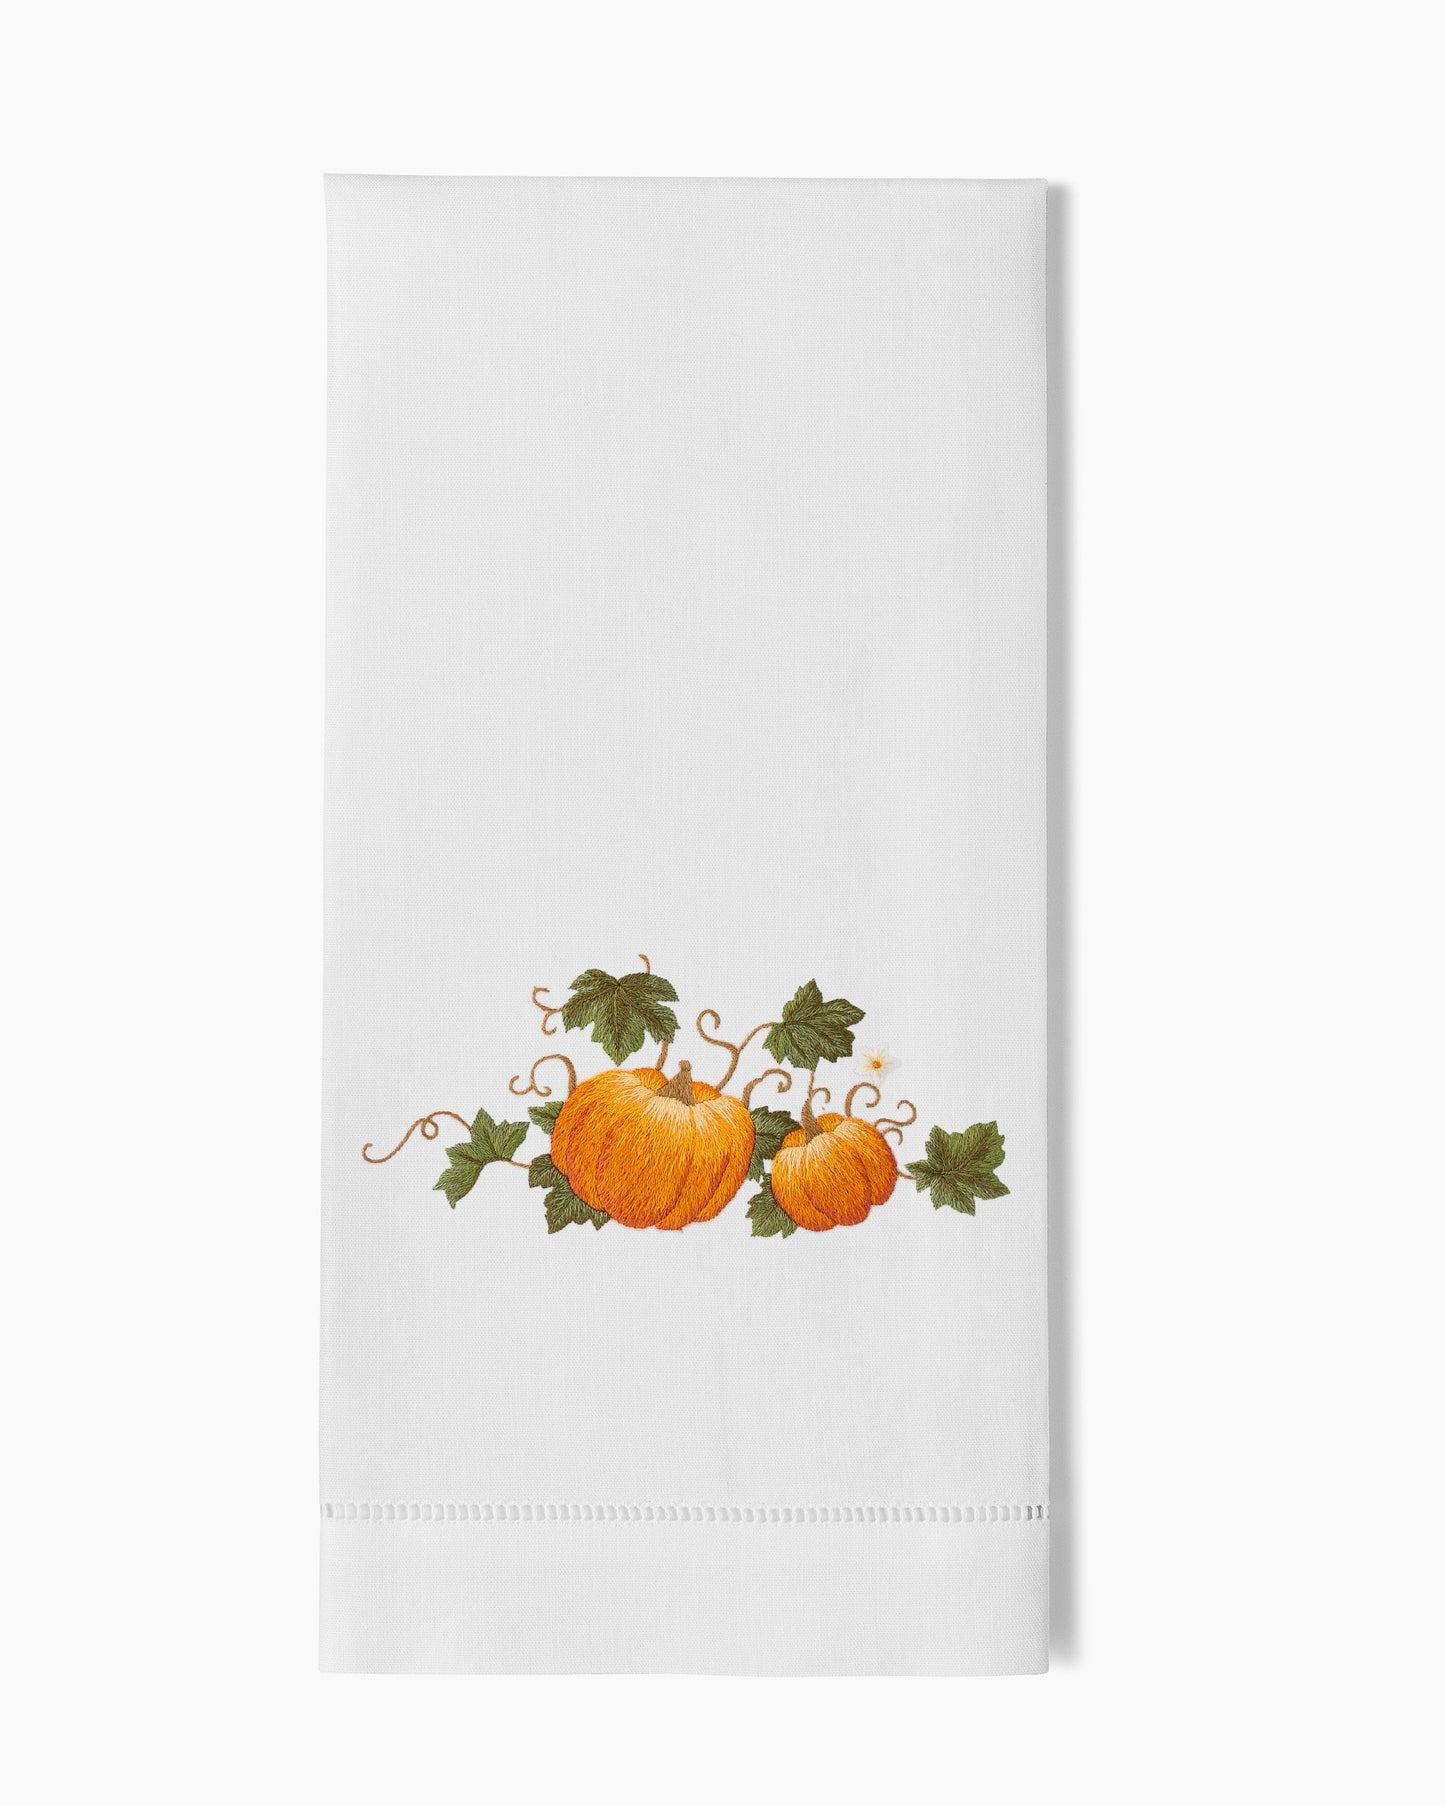 A white Henry Handwork dish towel with Pumpkins Grande Hand Towel and leaves on it.